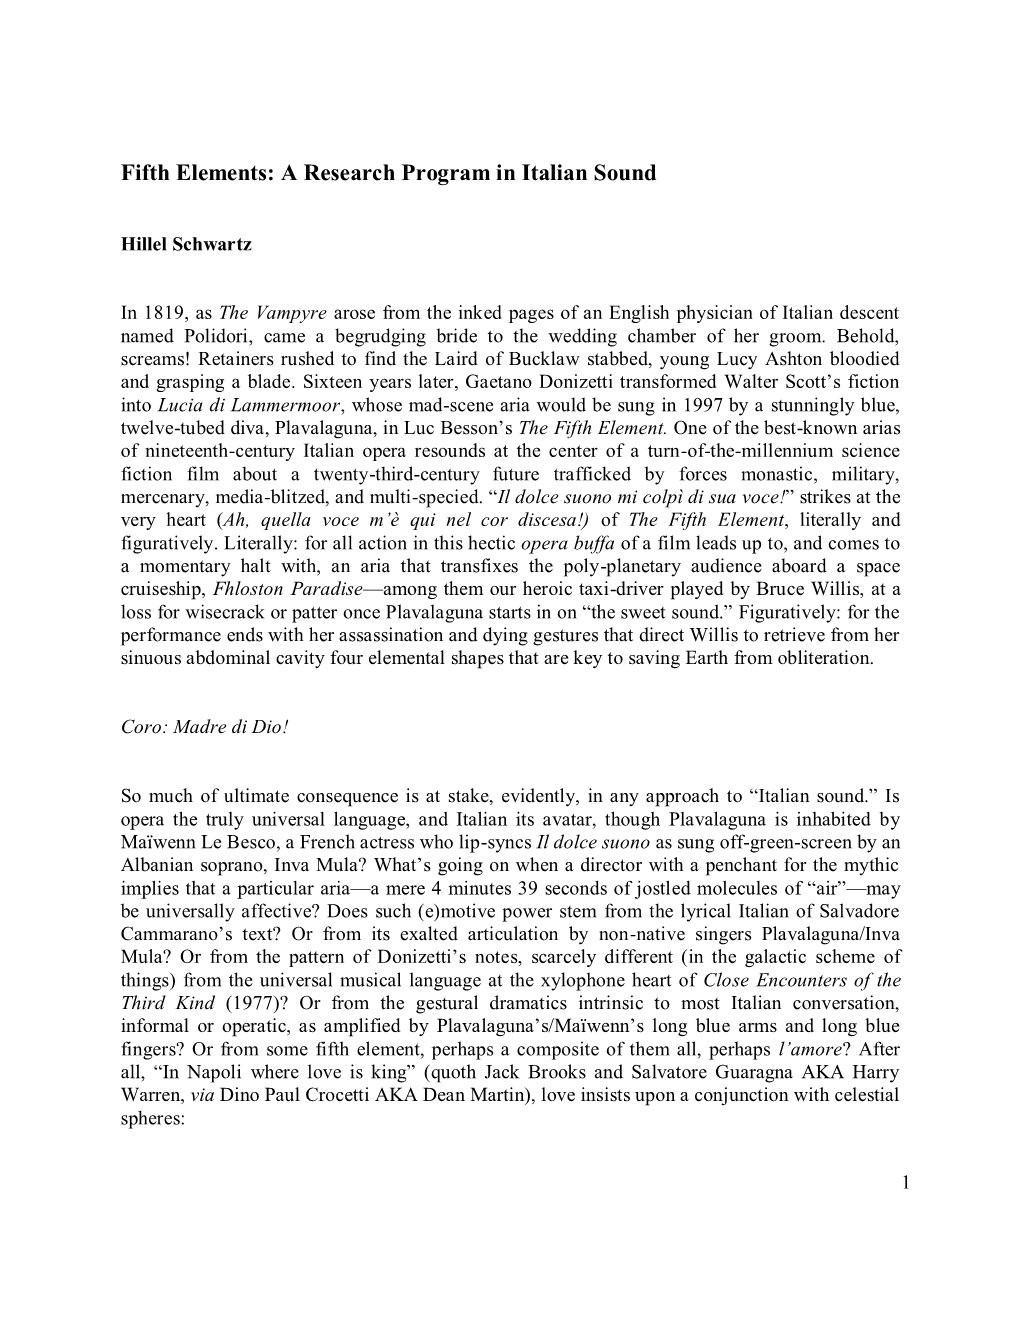 Fifth Elements: a Research Program in Italian Sound